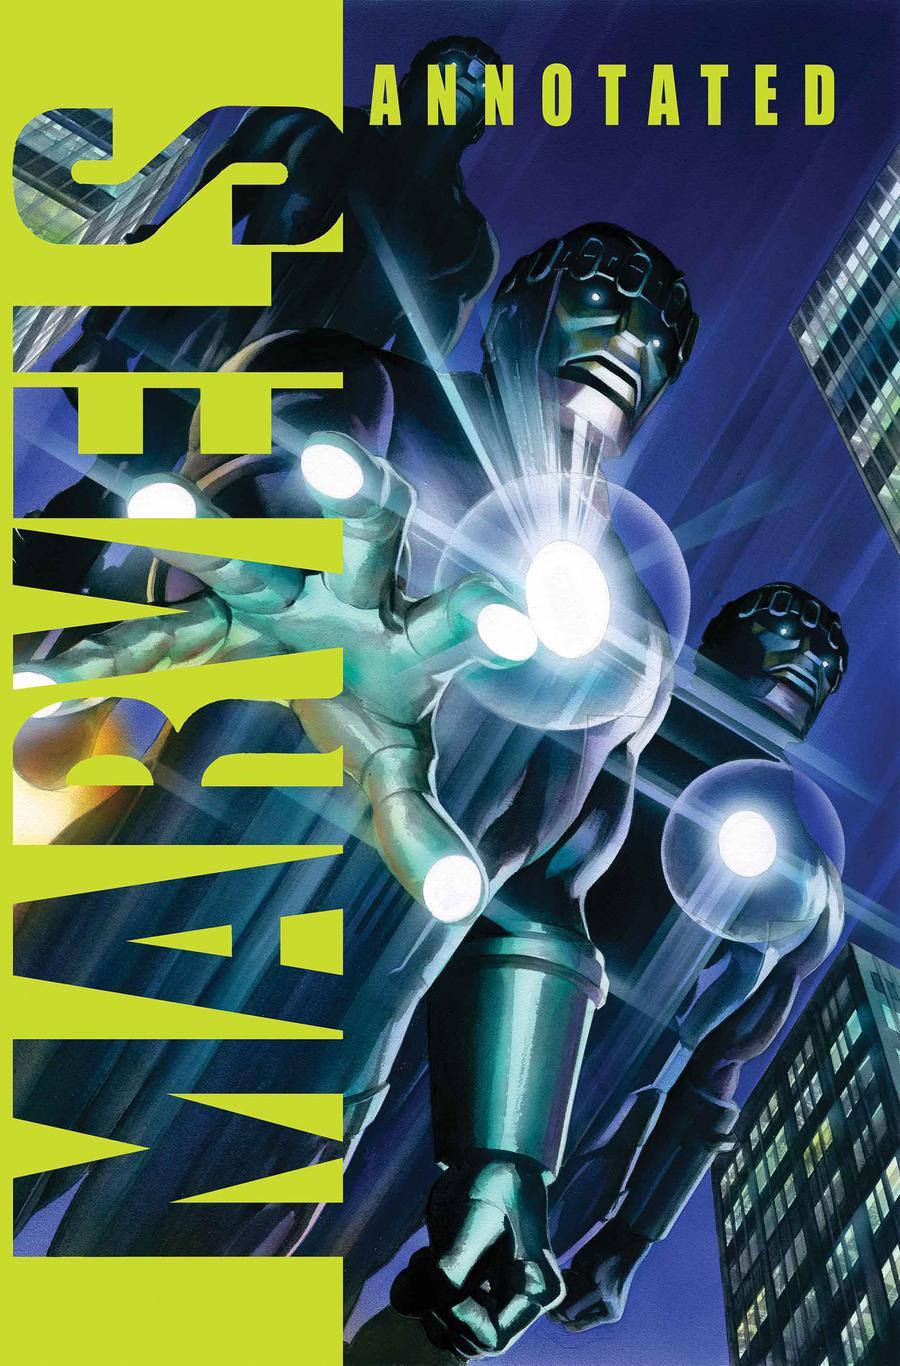 Marvels Annotated Vol. 1 #2